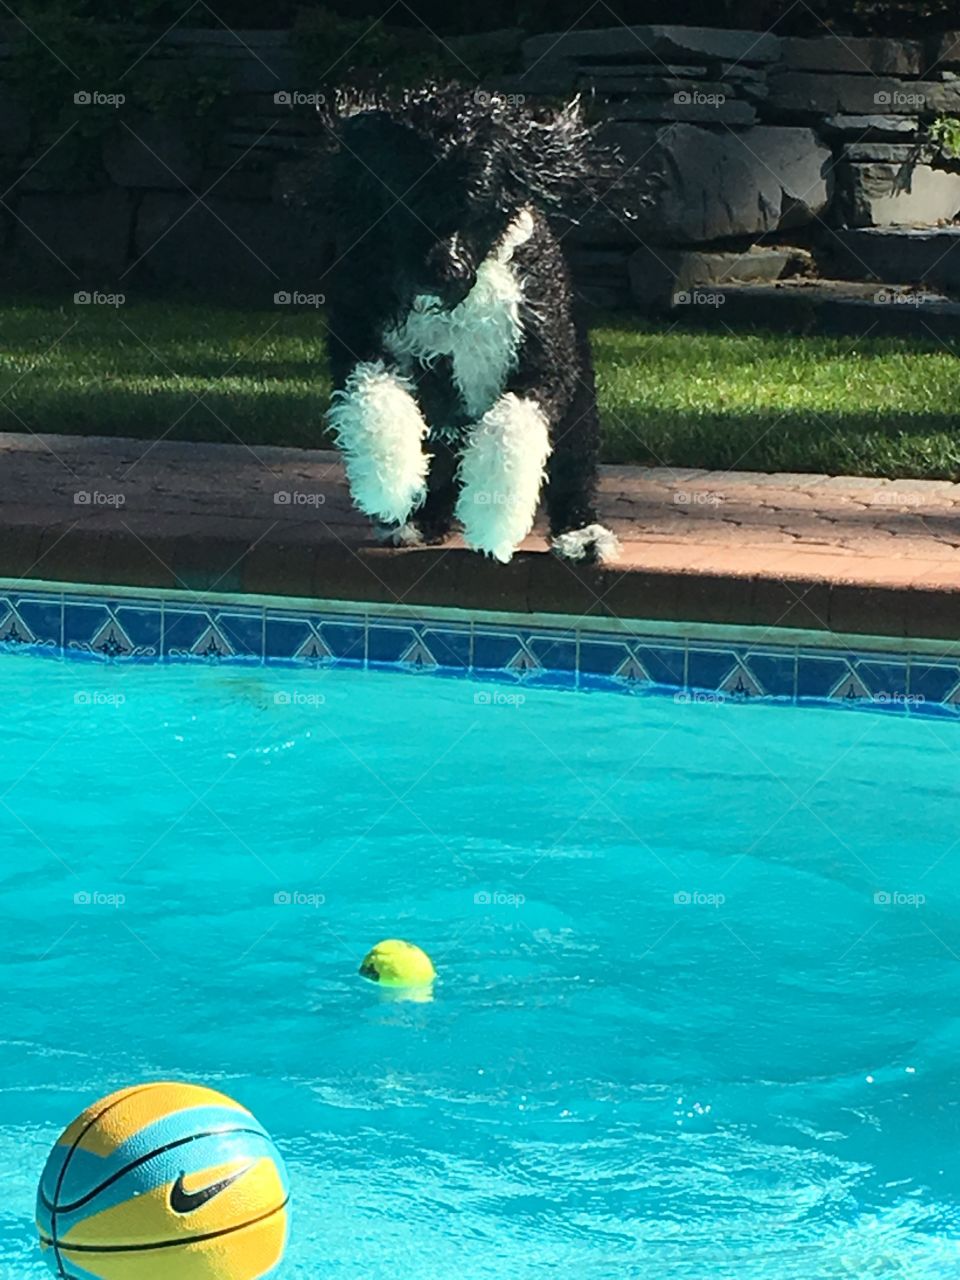 Dog jumping in pool 